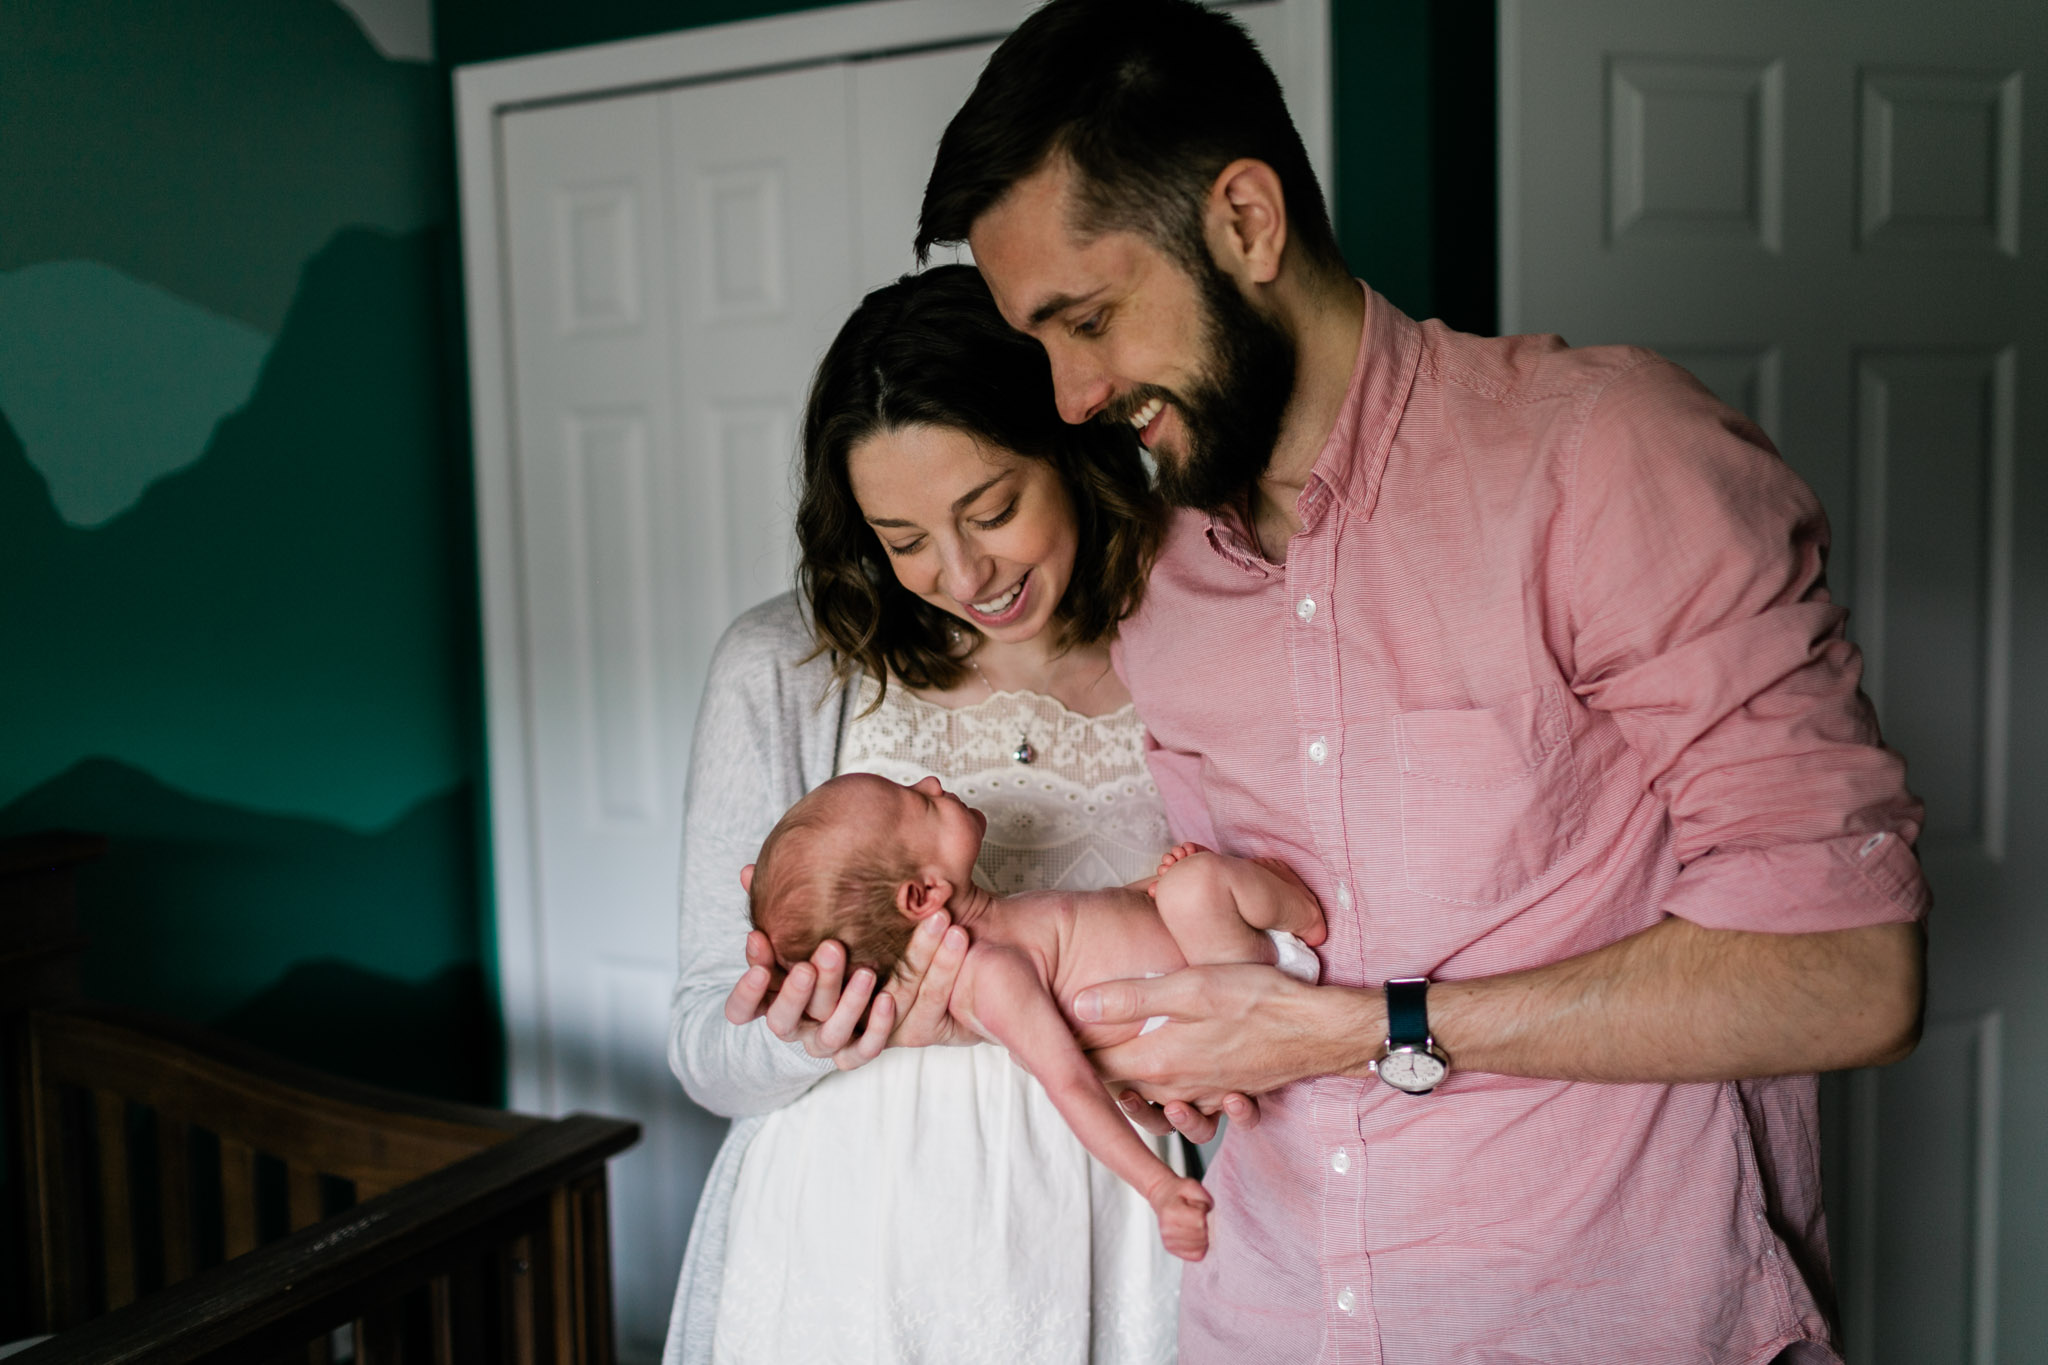 Durham Newborn Photographer | By G. Lin Photography | New parents holding baby and laughing